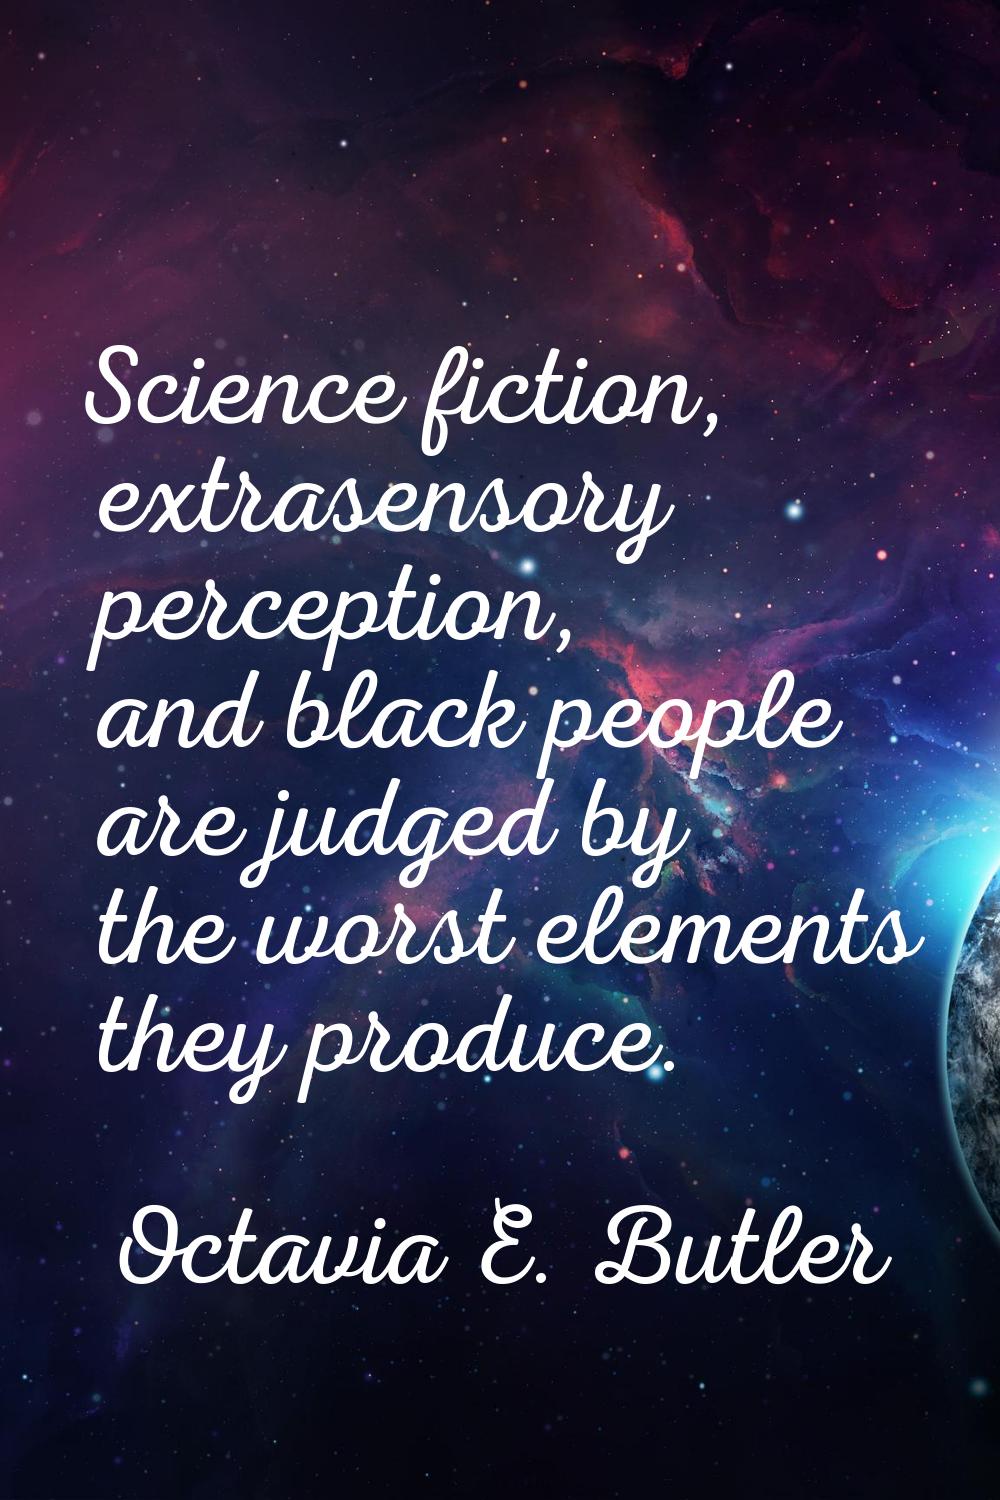 Science fiction, extrasensory perception, and black people are judged by the worst elements they pr